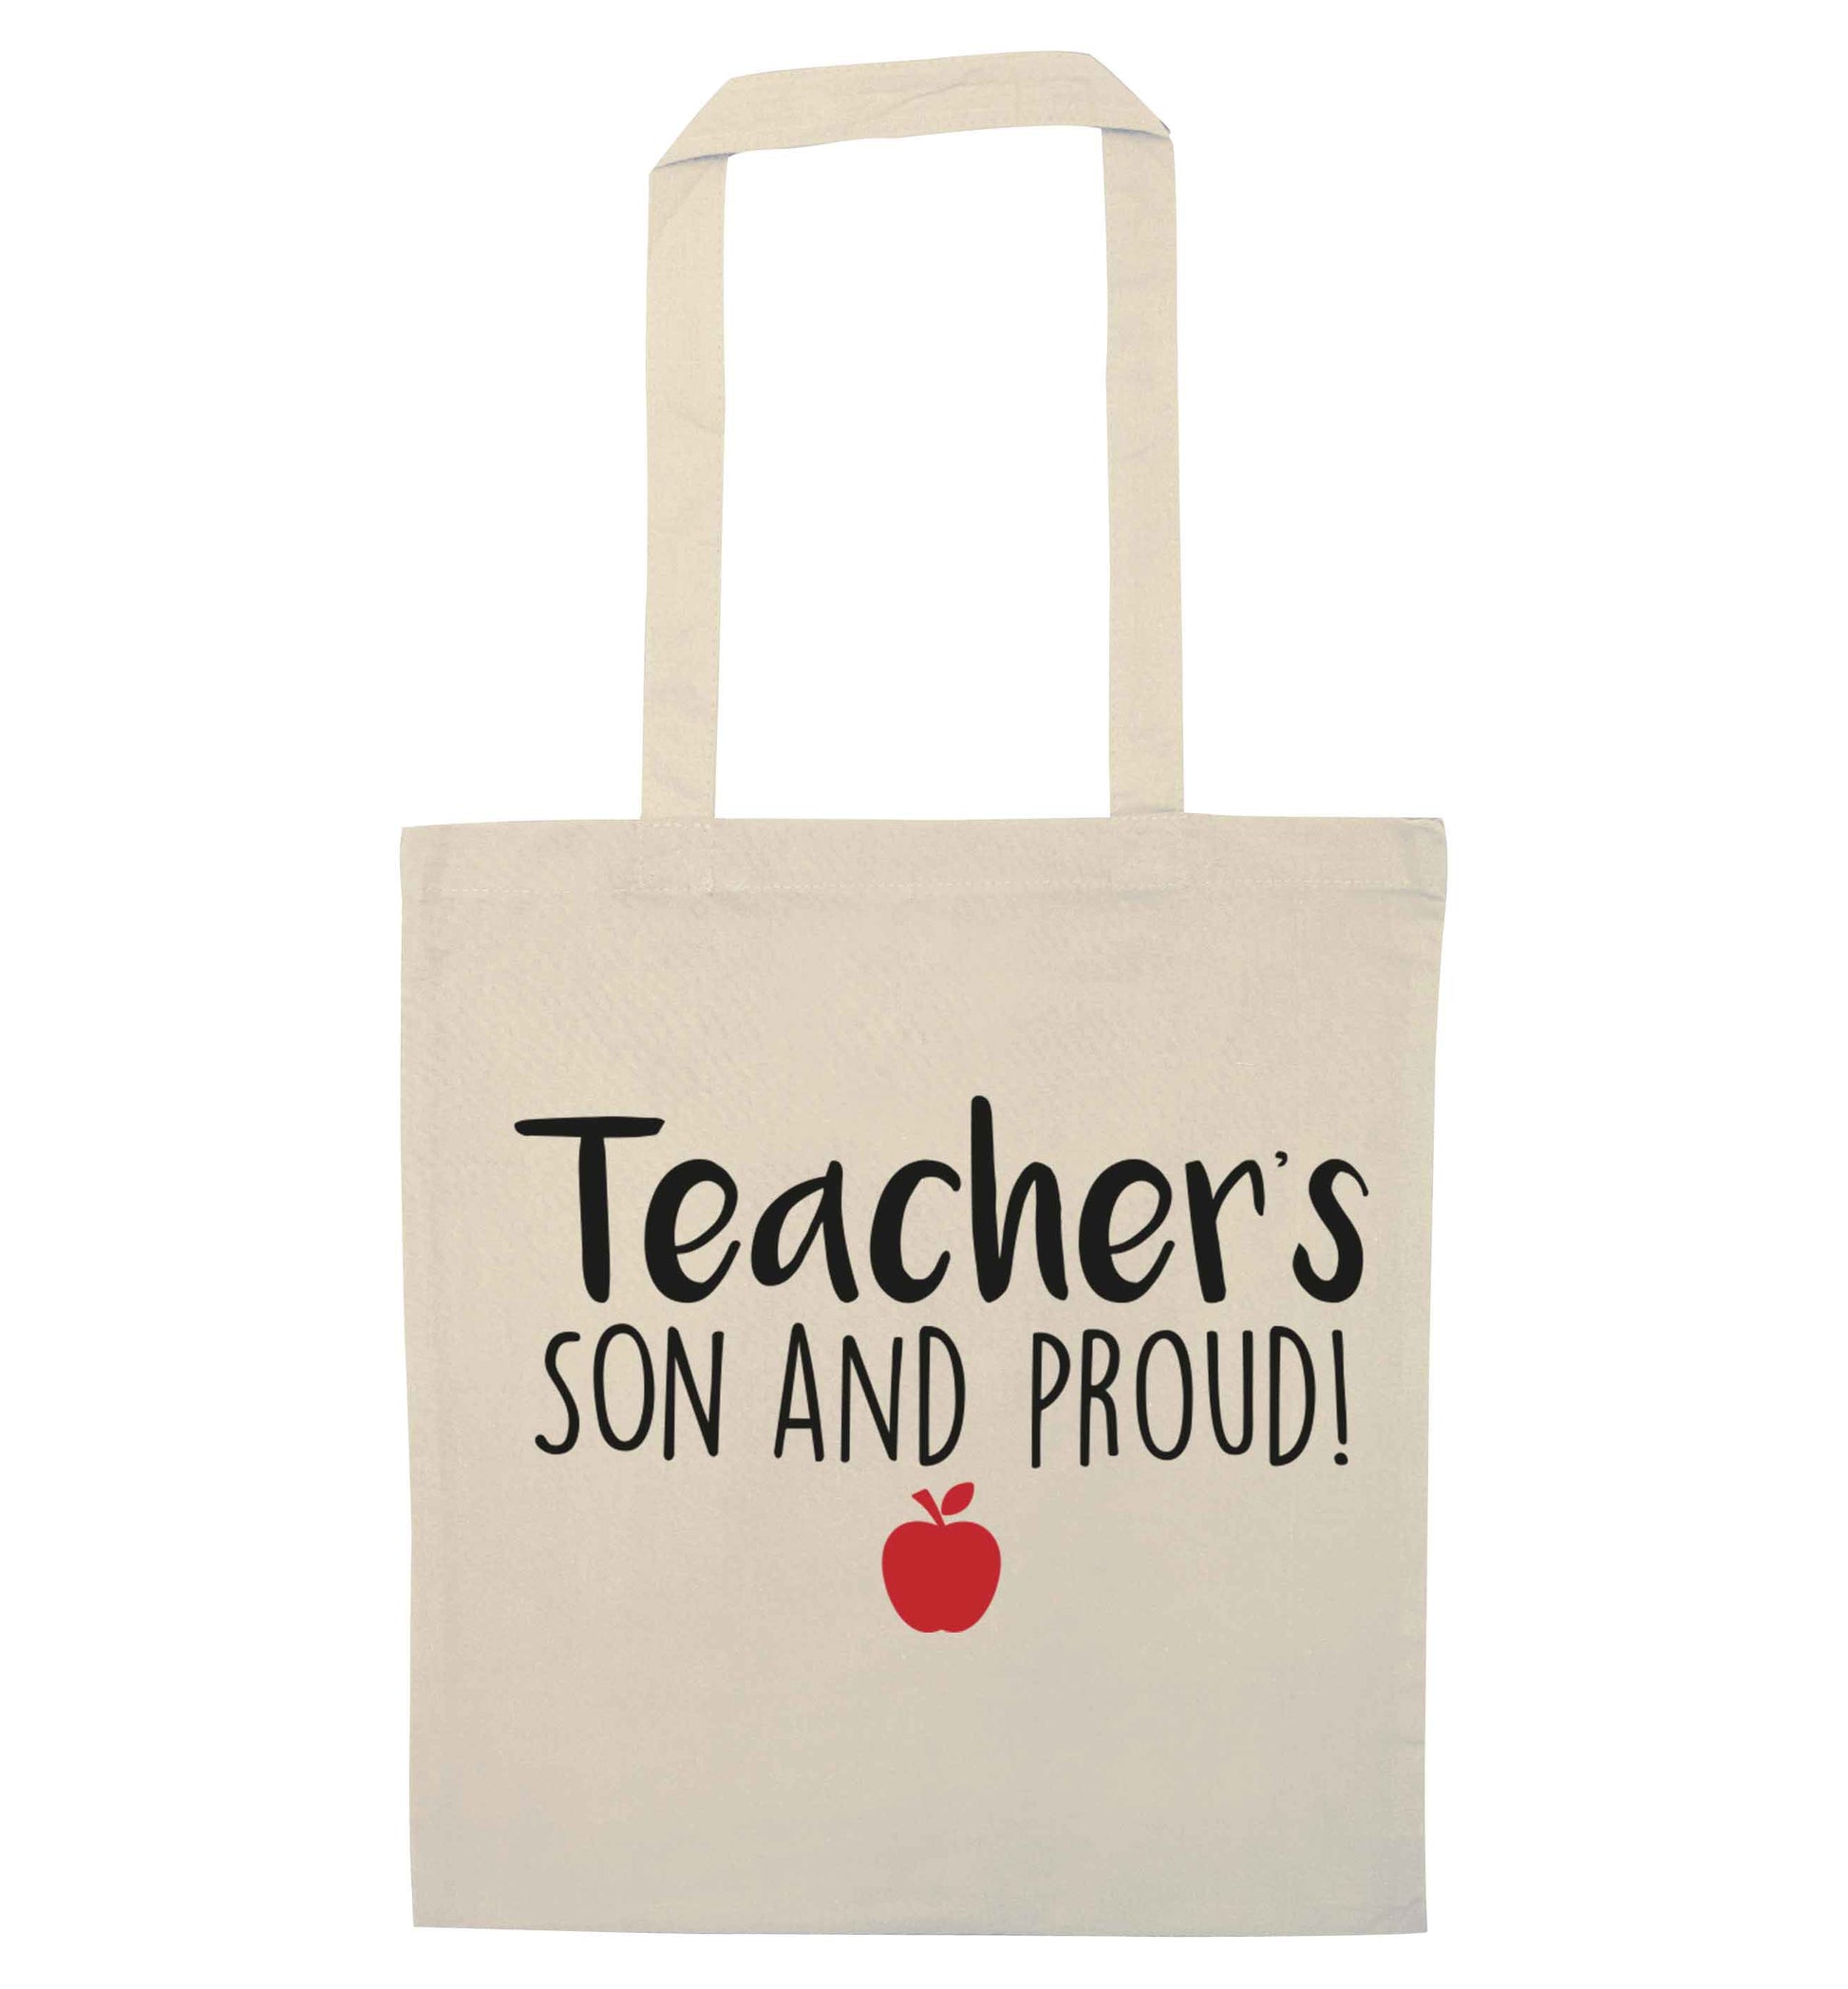 Teachers son and proud natural tote bag